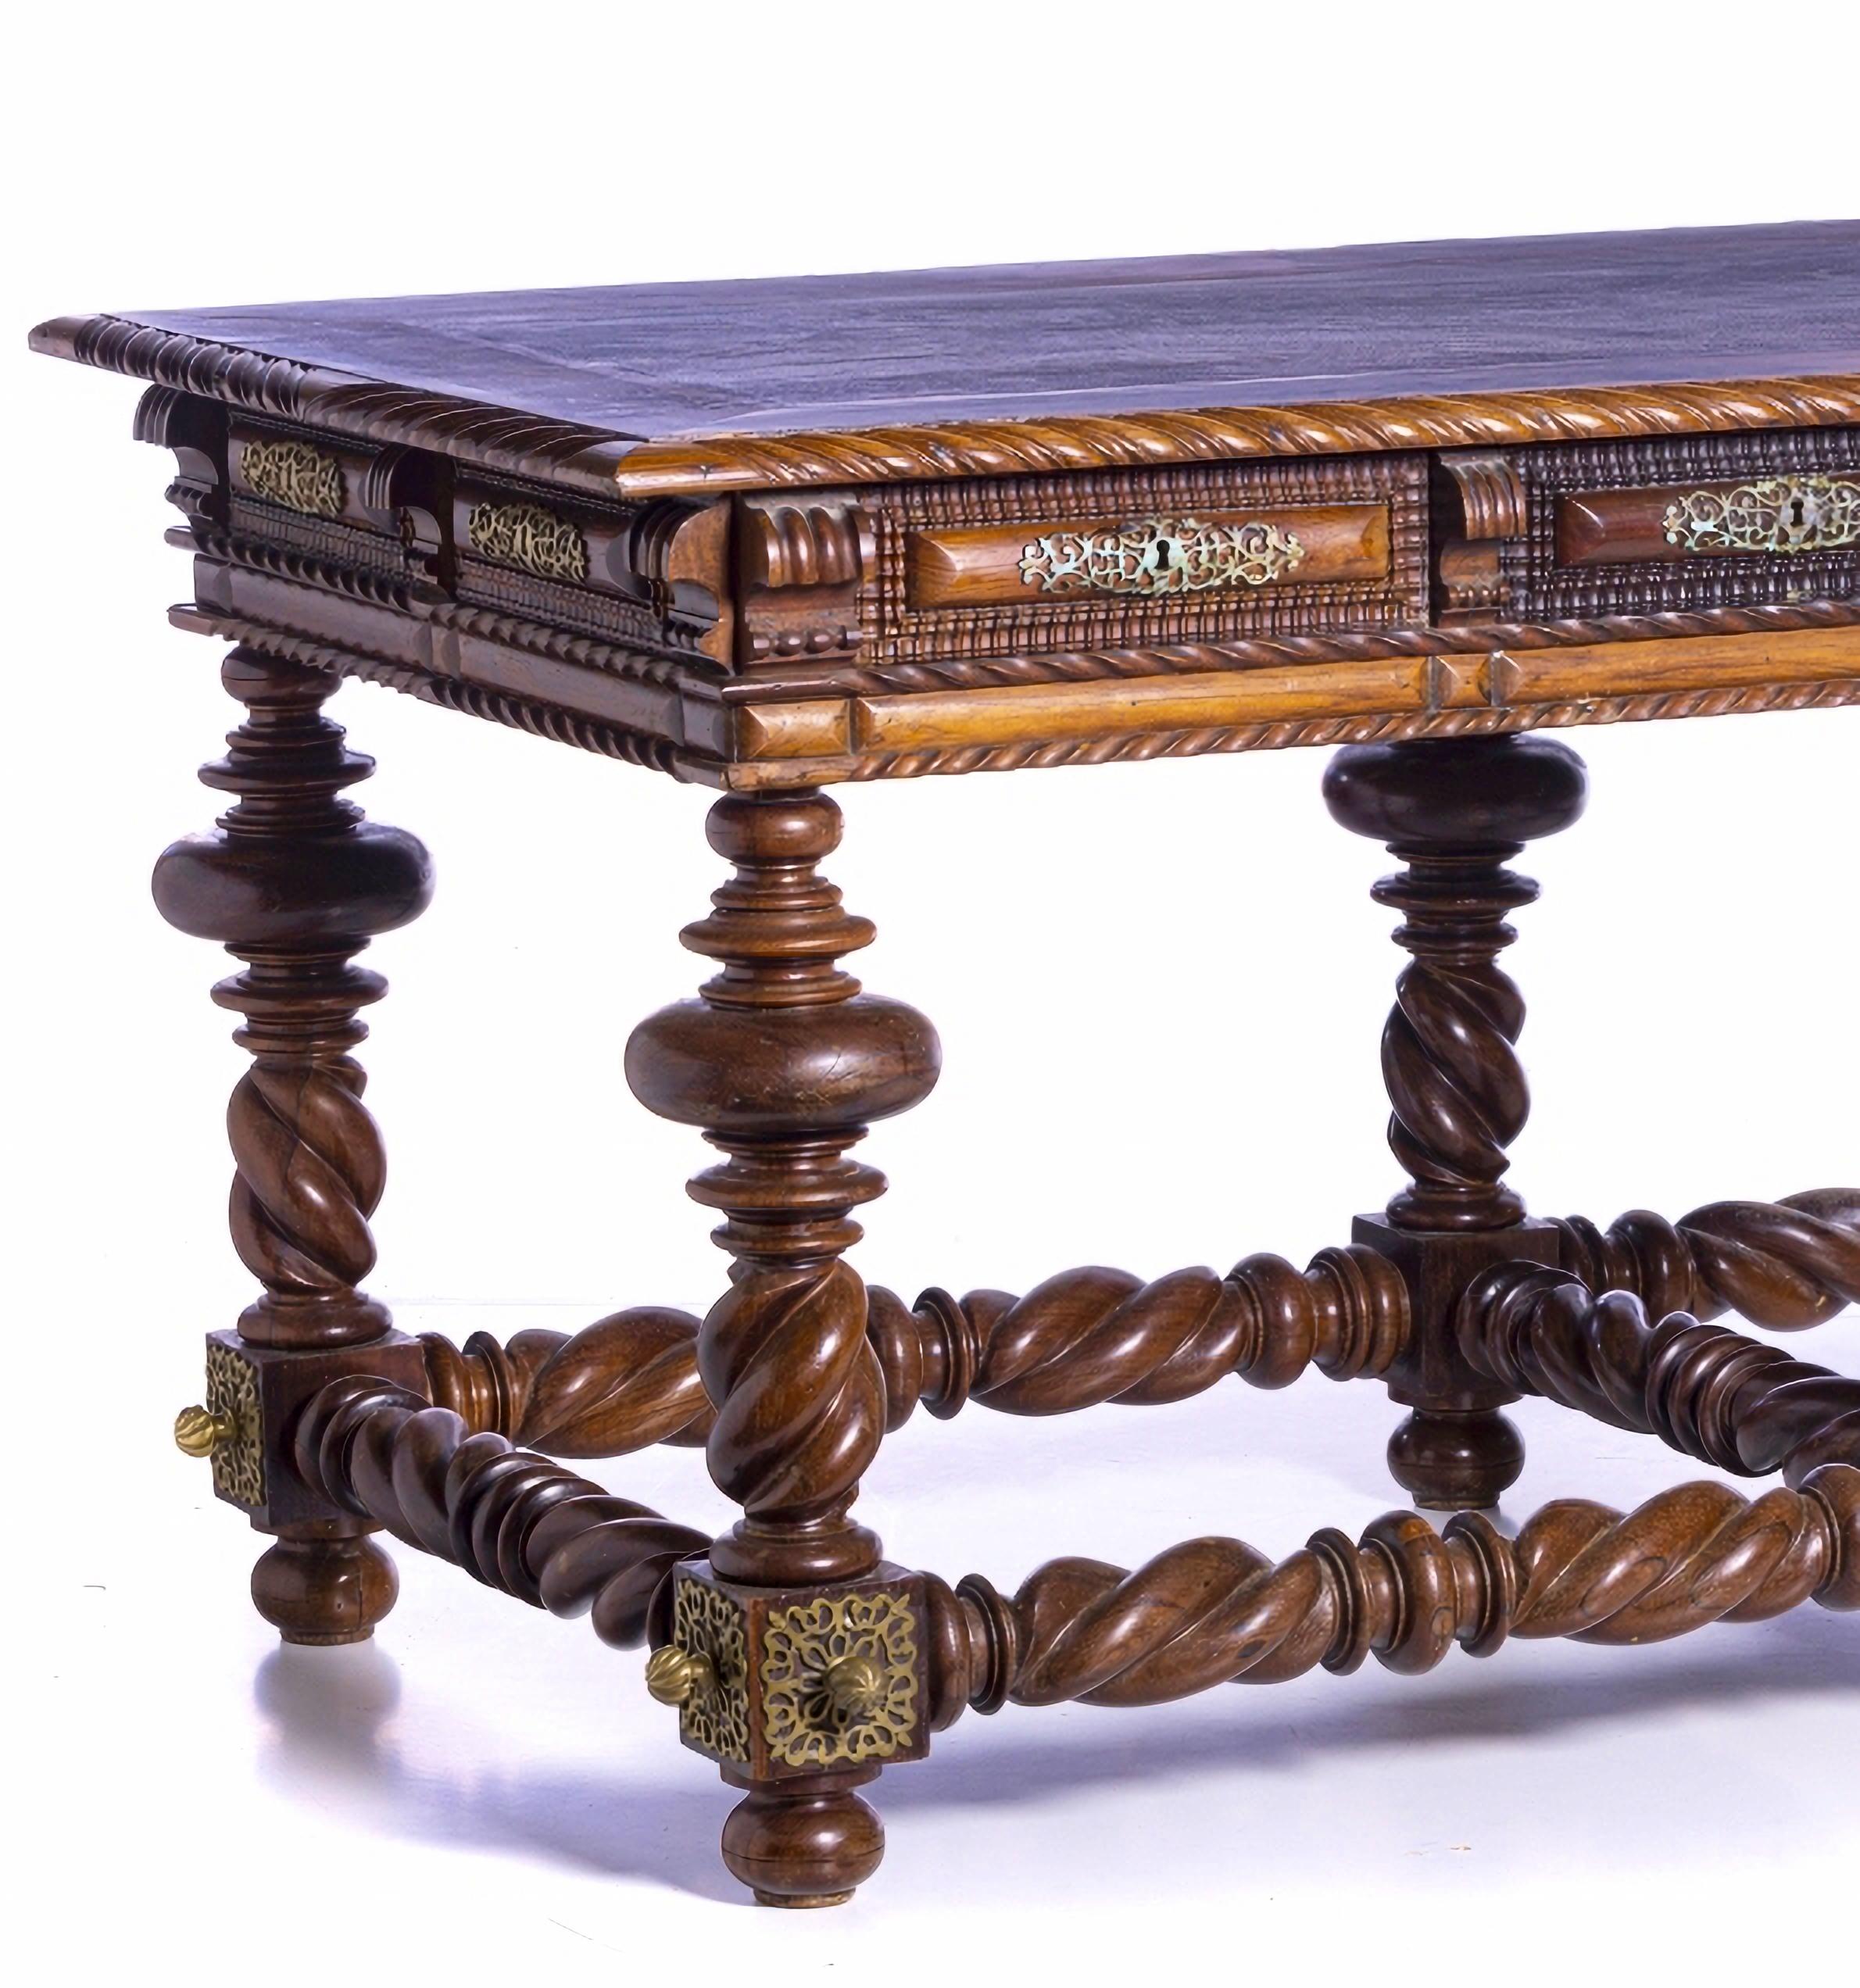 Hand-Crafted Important Large Portuguese Buffet Table 17th Century